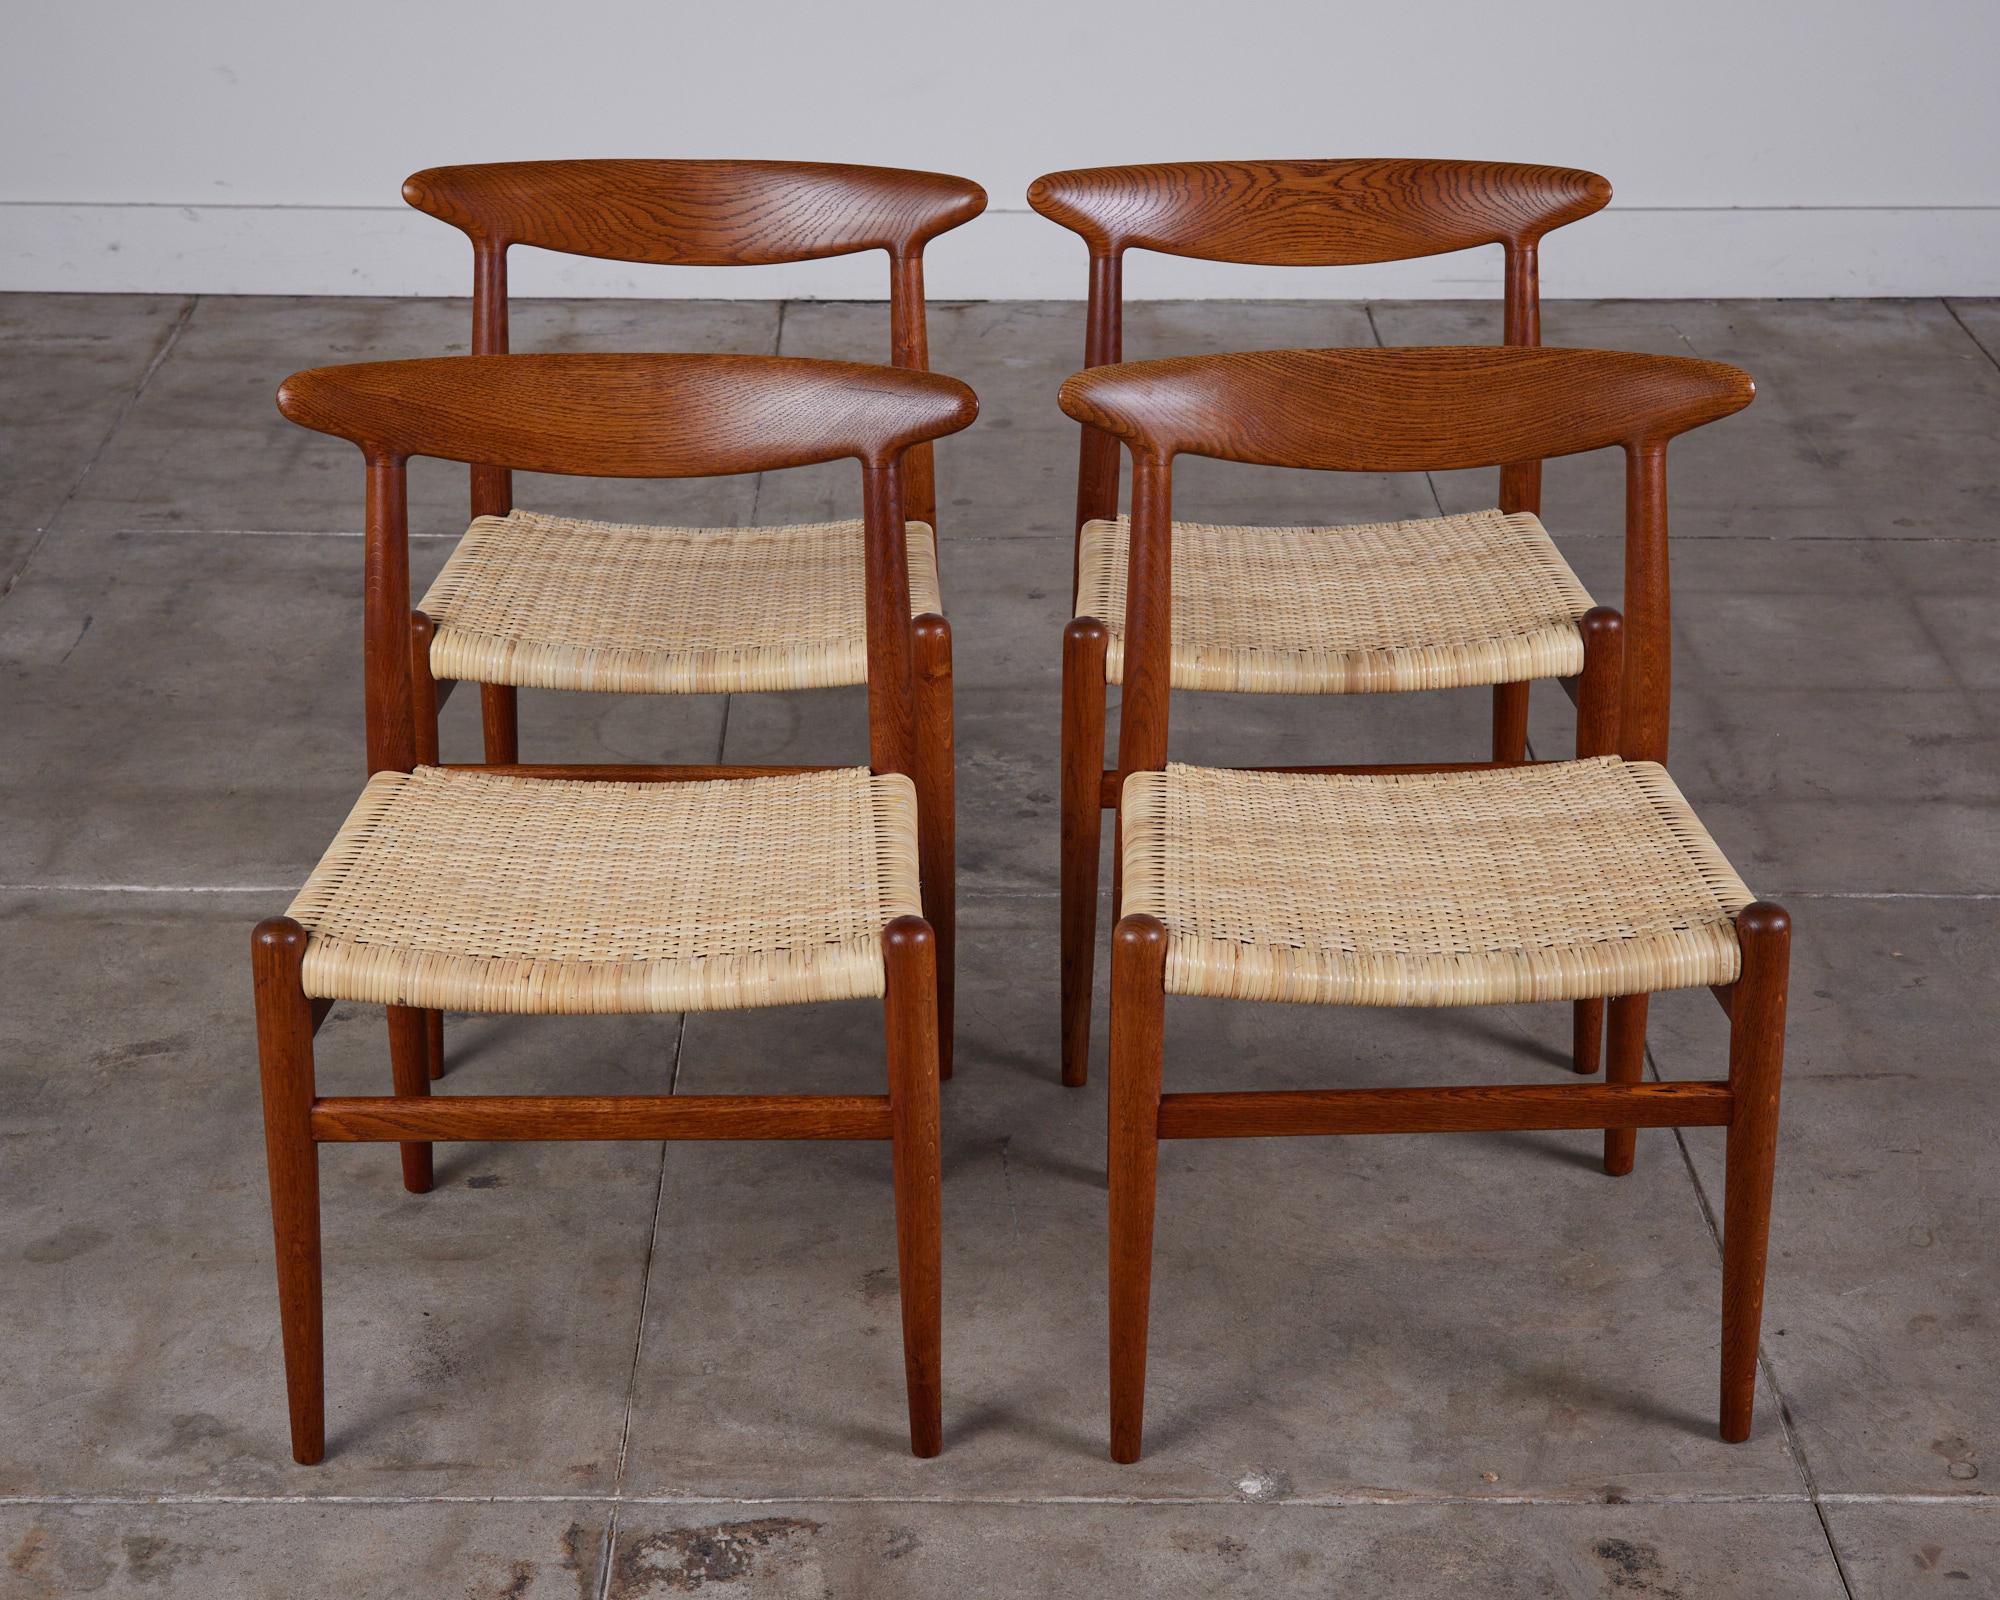 Set of four Hans J. Wegner dining chairs in oak and cane, c.1950s, Denmark. The model W2 were executed by C.M Madsen.

Stamped C.M. Madsen FABRIKER- MADE IN DENMARK.

Dimensions: 22